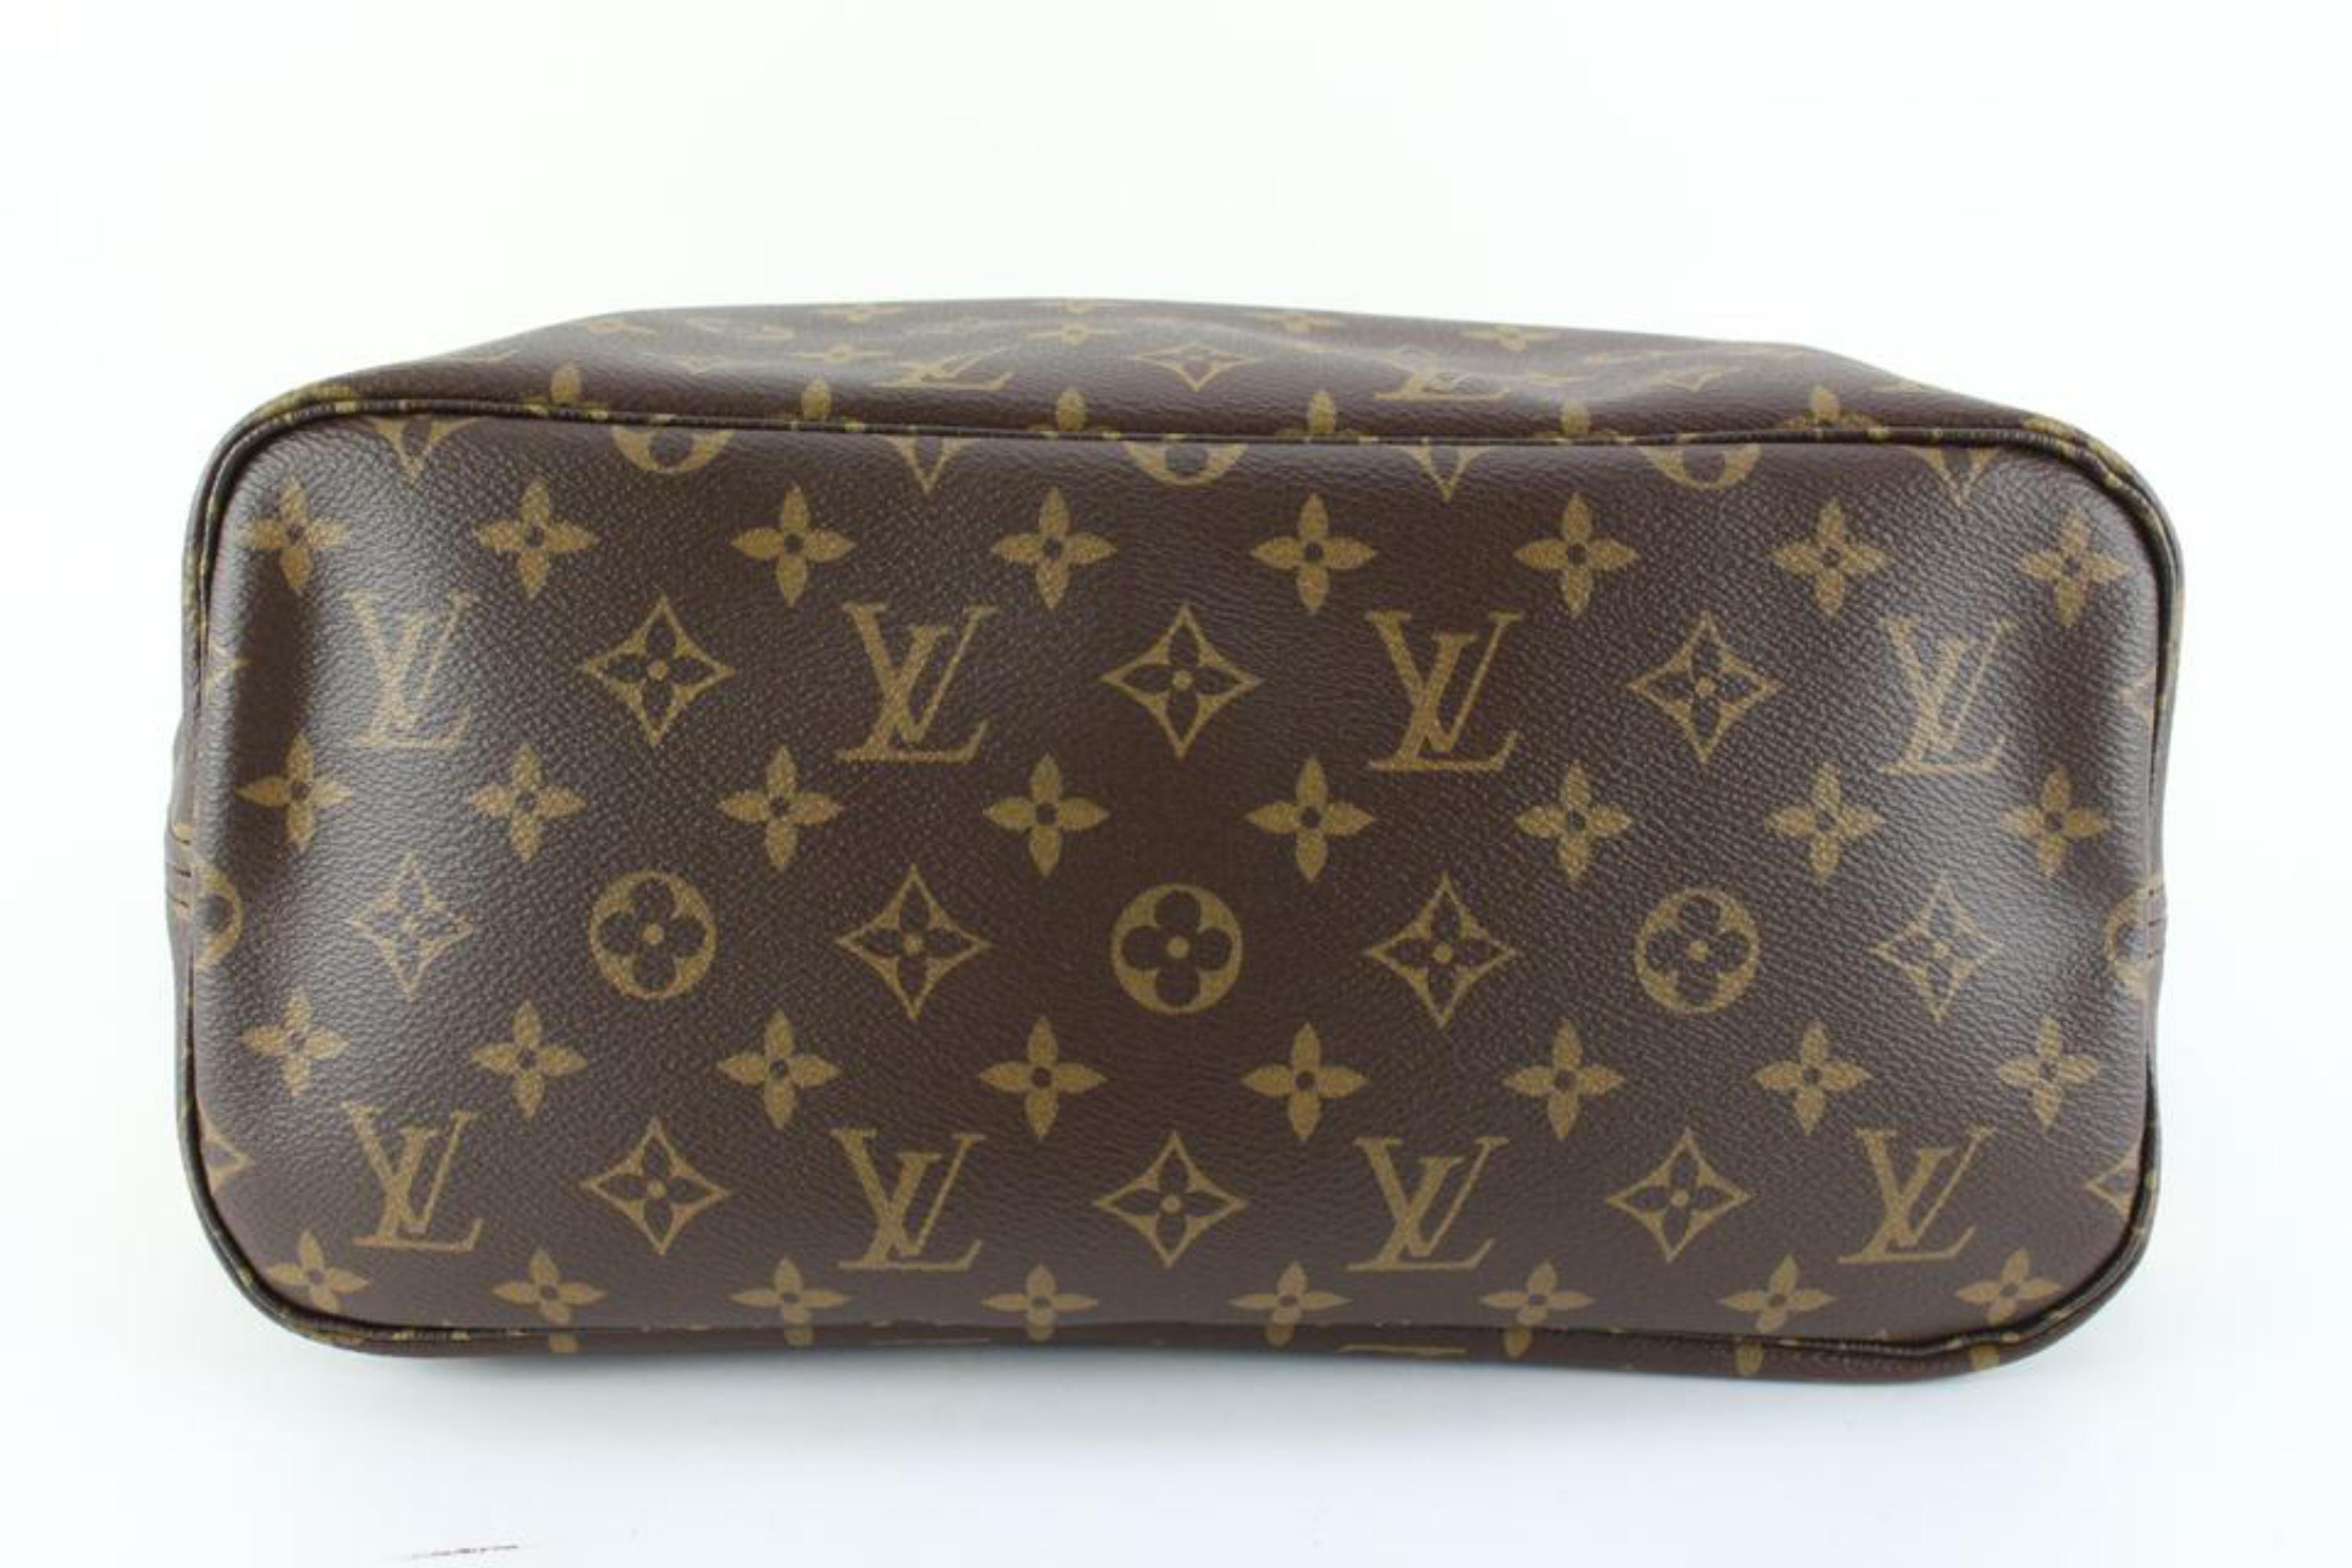 Louis Vuitton Red x Monogram NM Neverfull MM Tote Bag with Pouch 9lz810s In New Condition For Sale In Dix hills, NY